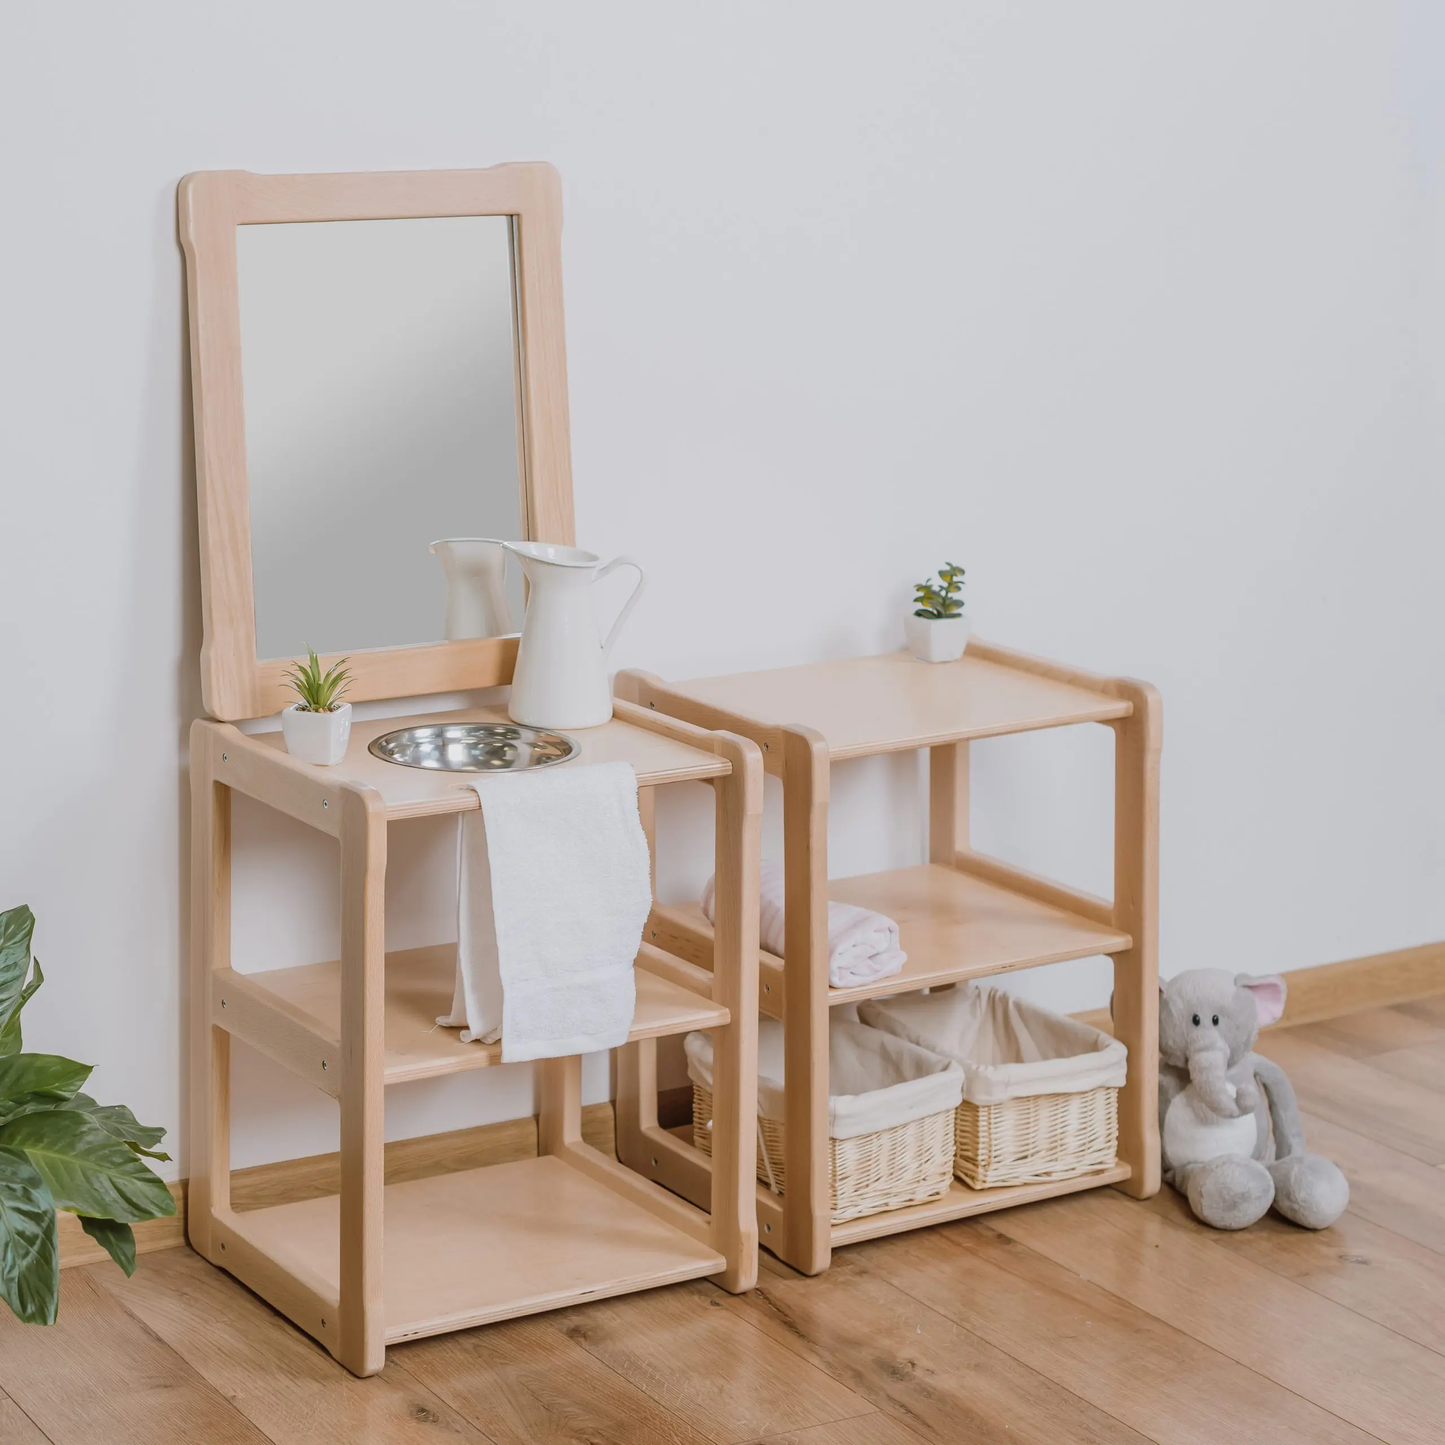 Montessori washbasin with mirror combined with a small shelf